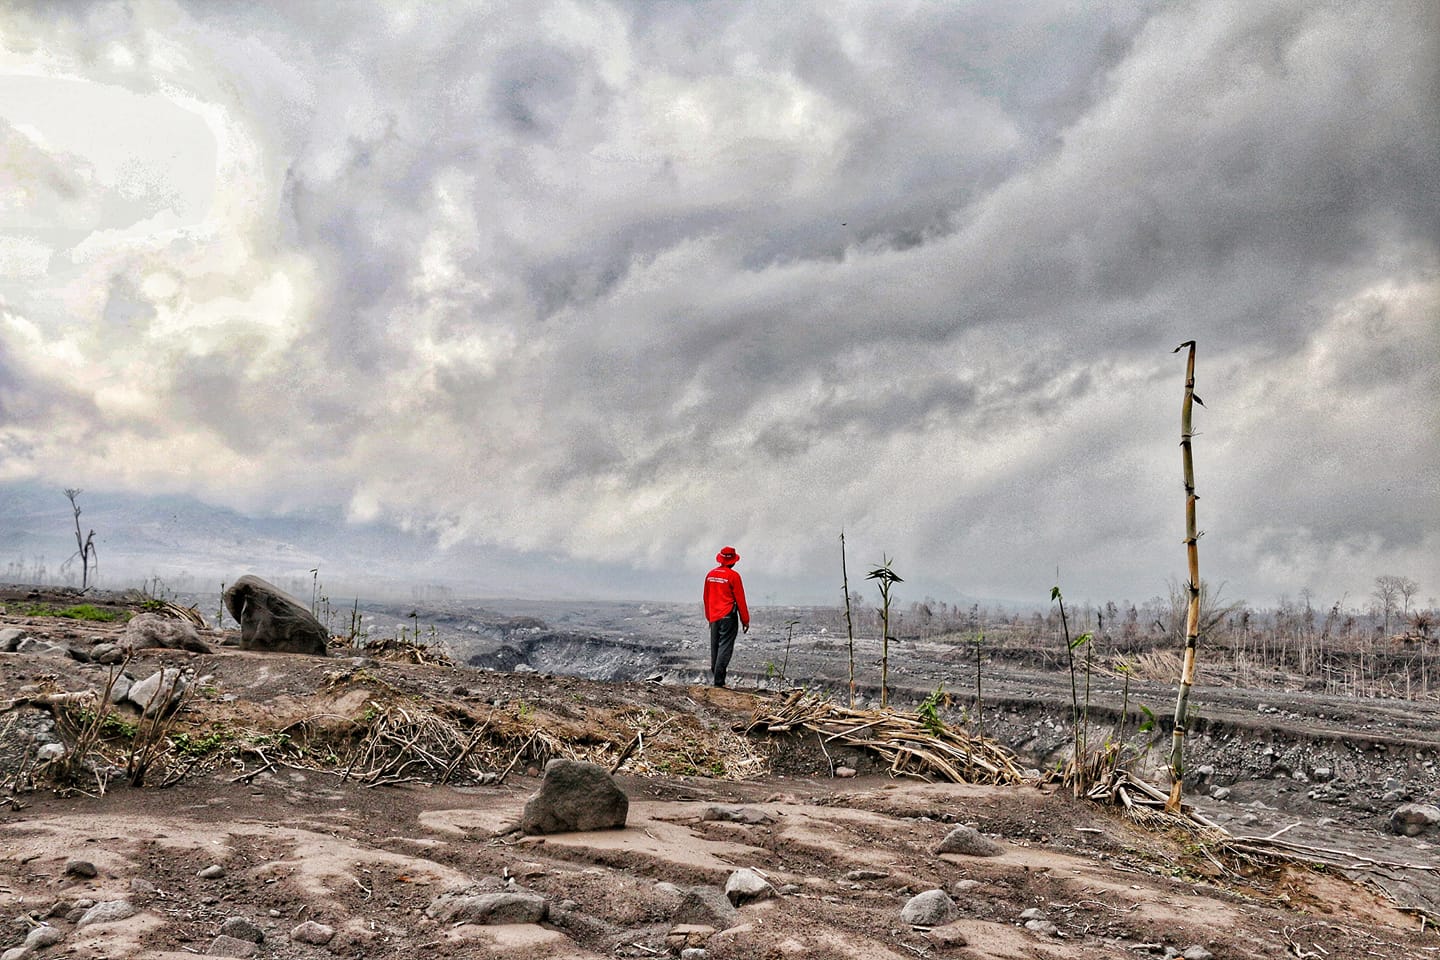 A person assessing the damage to farmland in supiturang village after the mount semeru eruption.